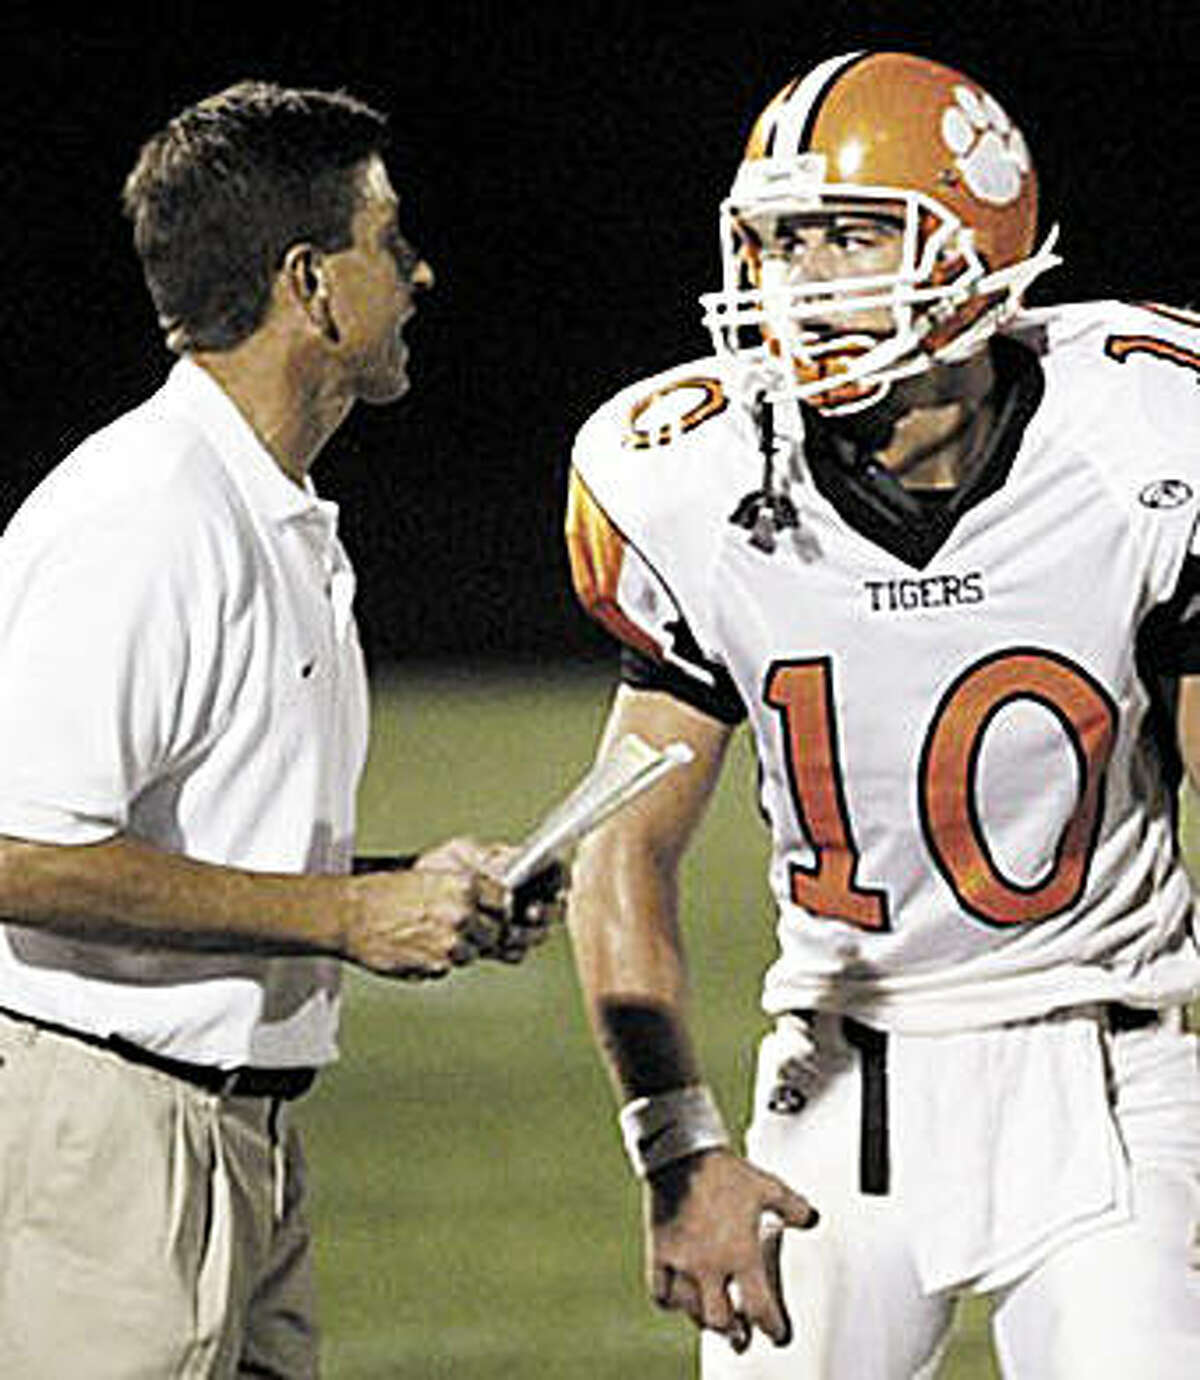 Former Edwardsville coach Tim Dougherty, left, talks to EHS quarterback Joe Allaria during a game in 2006. Dougherty, who was the head coach at EHS from 1992 to 2007, is currently an assistant coach and defensive coordinator at Hamilton High School in Chandler, Arizona.